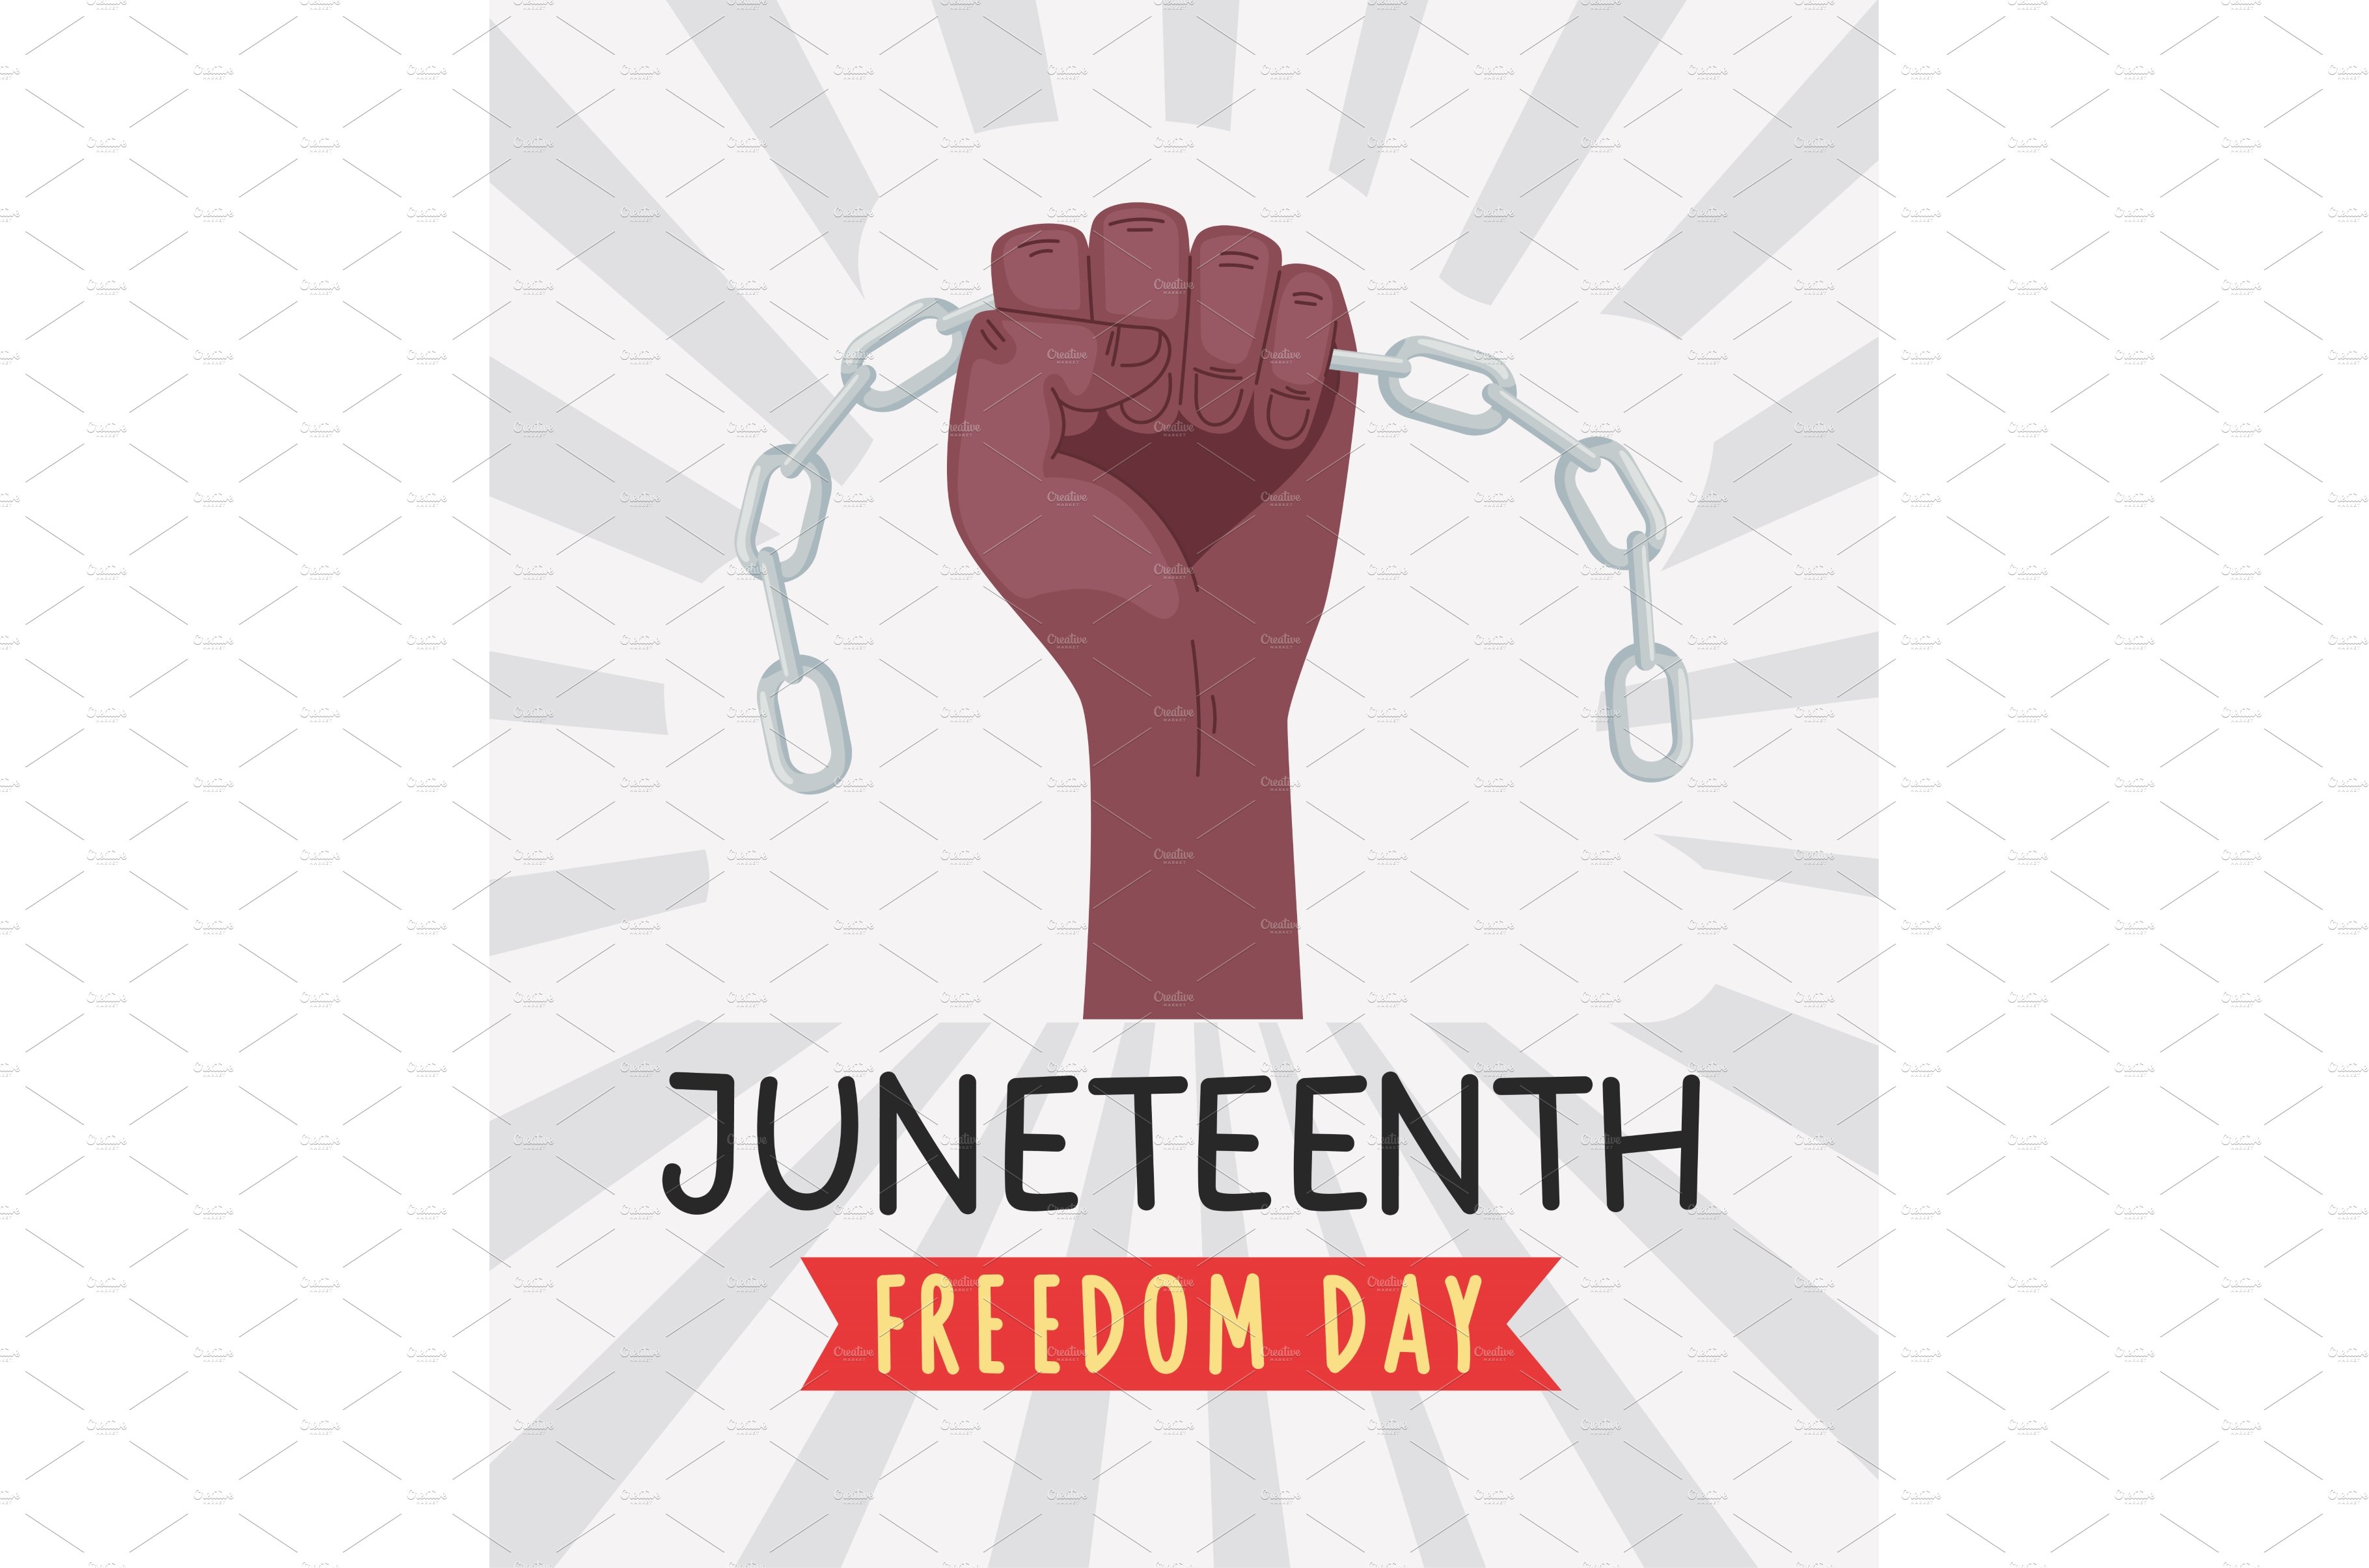 Juneteenth lettering with fist cover image.